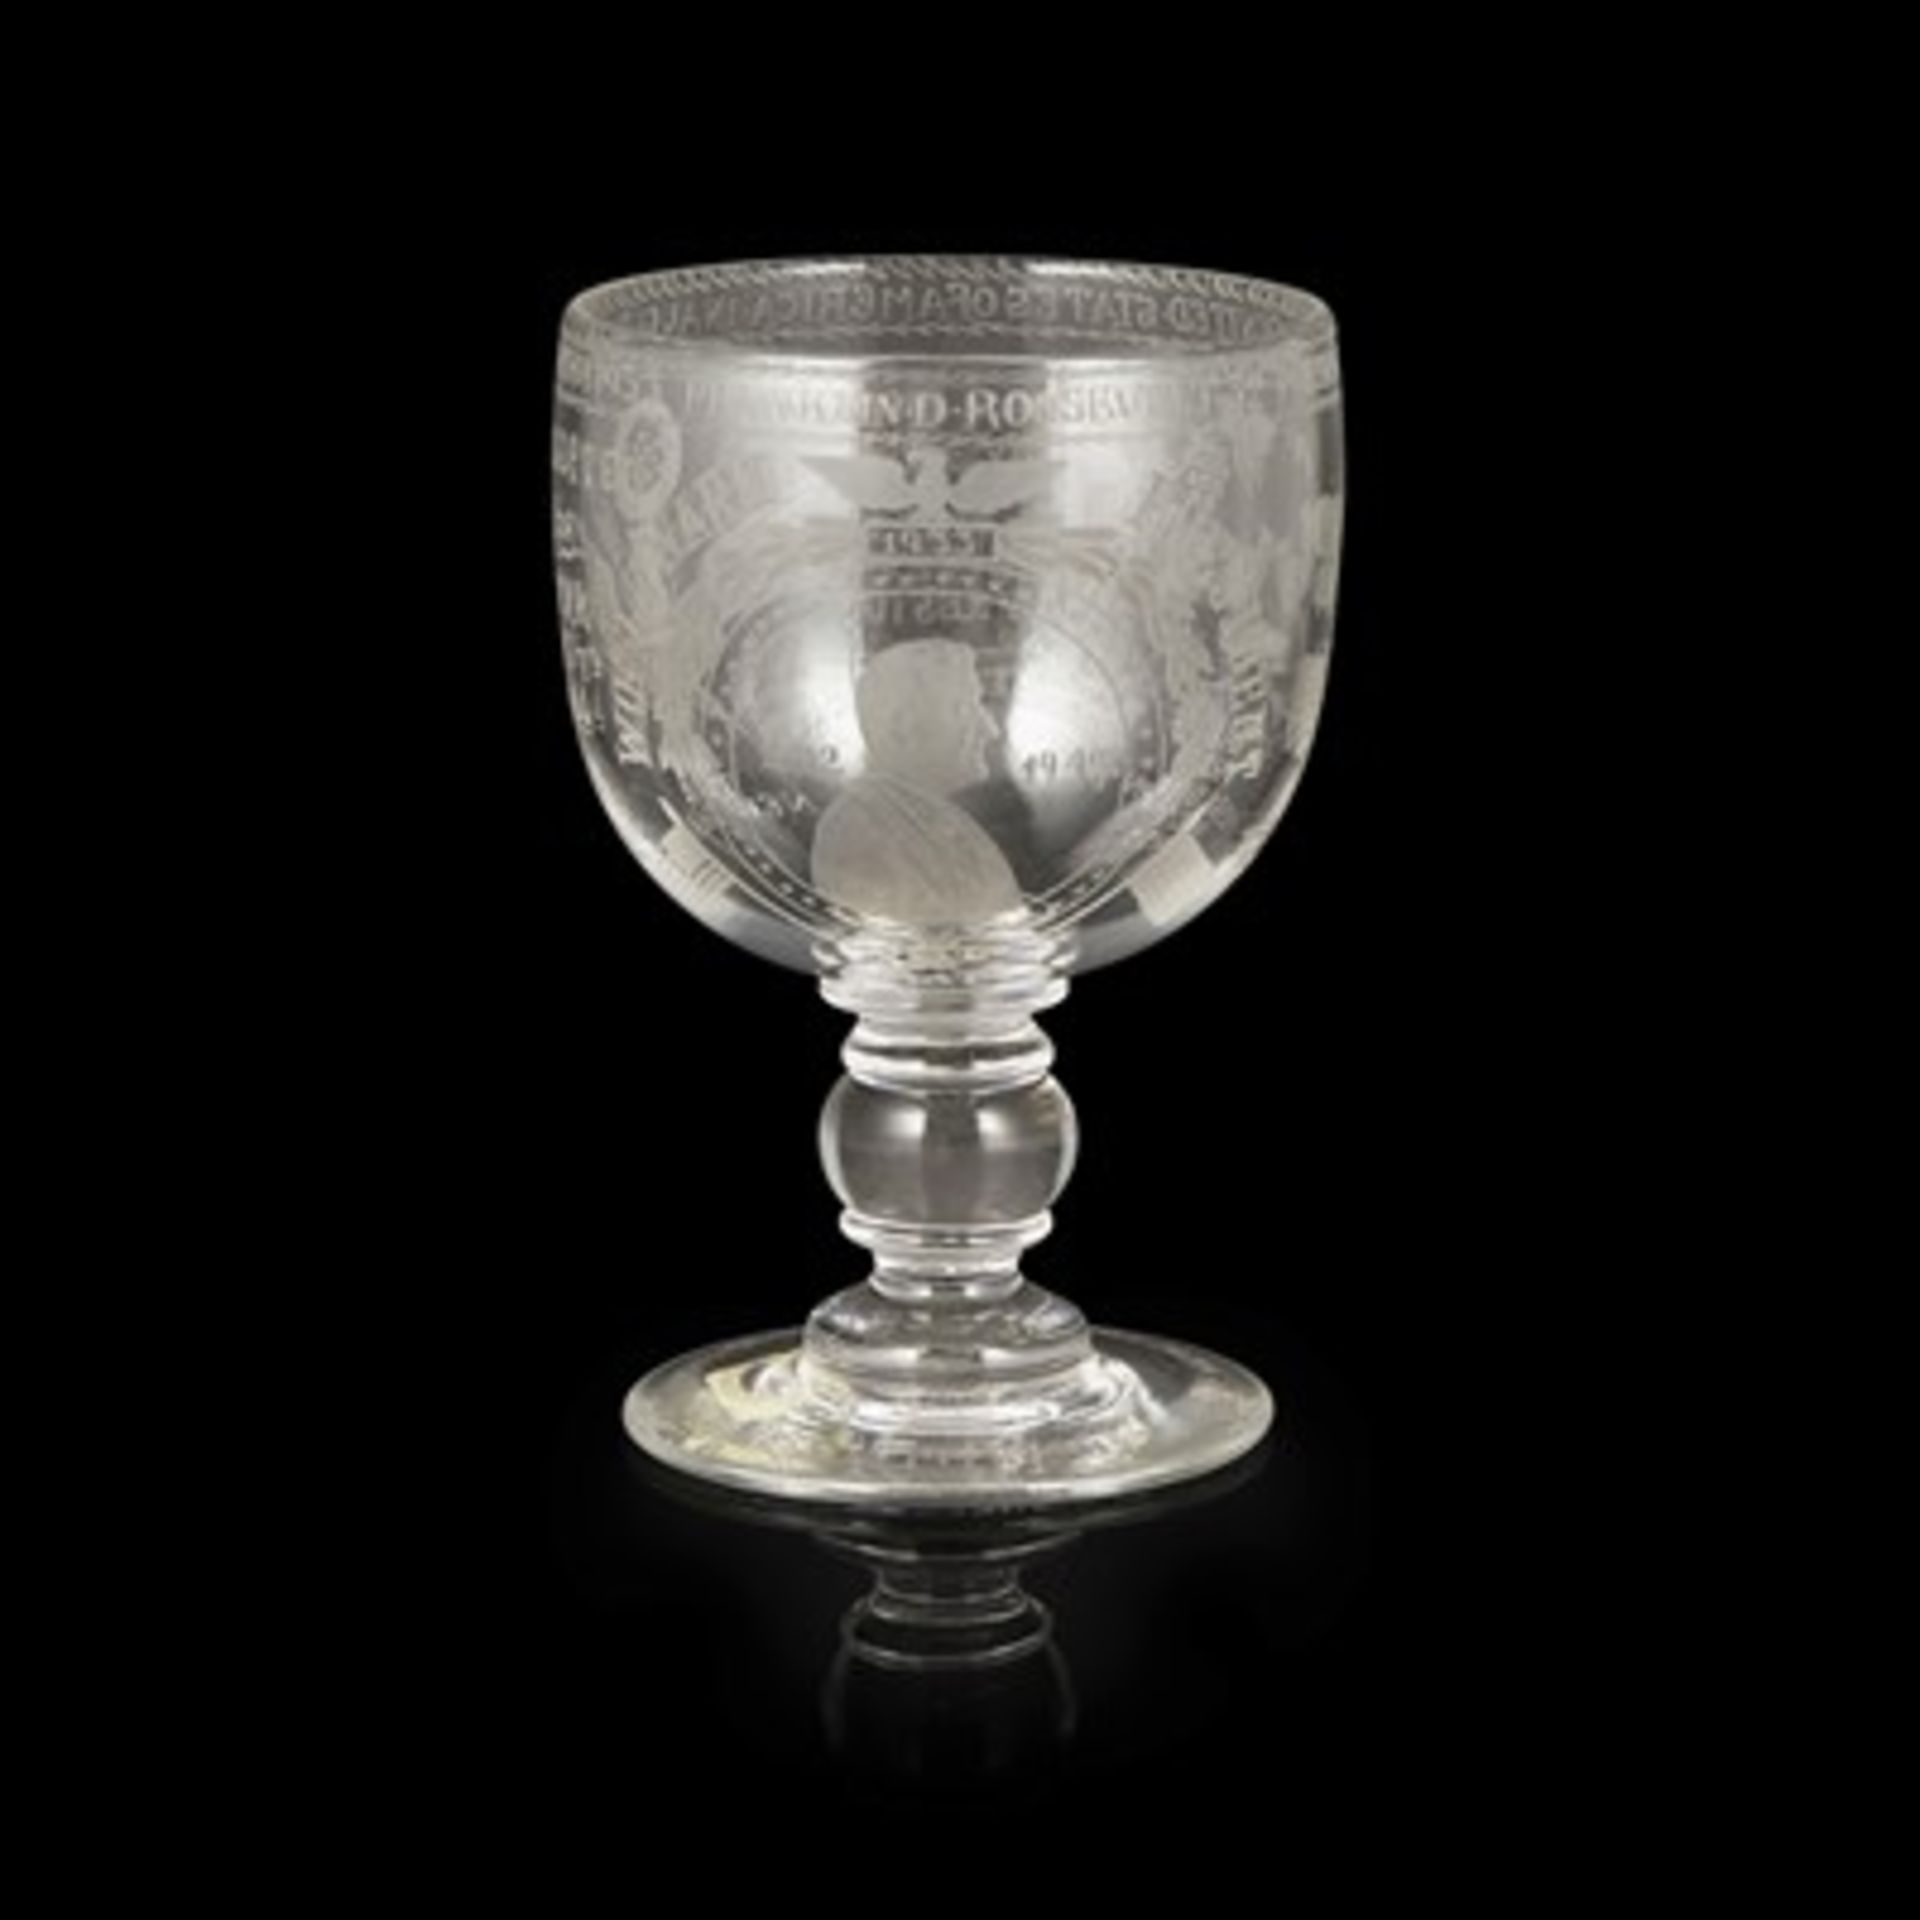 FRANKLIN D. ROOSEVELT COMMEMORATIVE GLASS GOBLET, BY VERNAY DATED 1945 the rounded bowl engraved